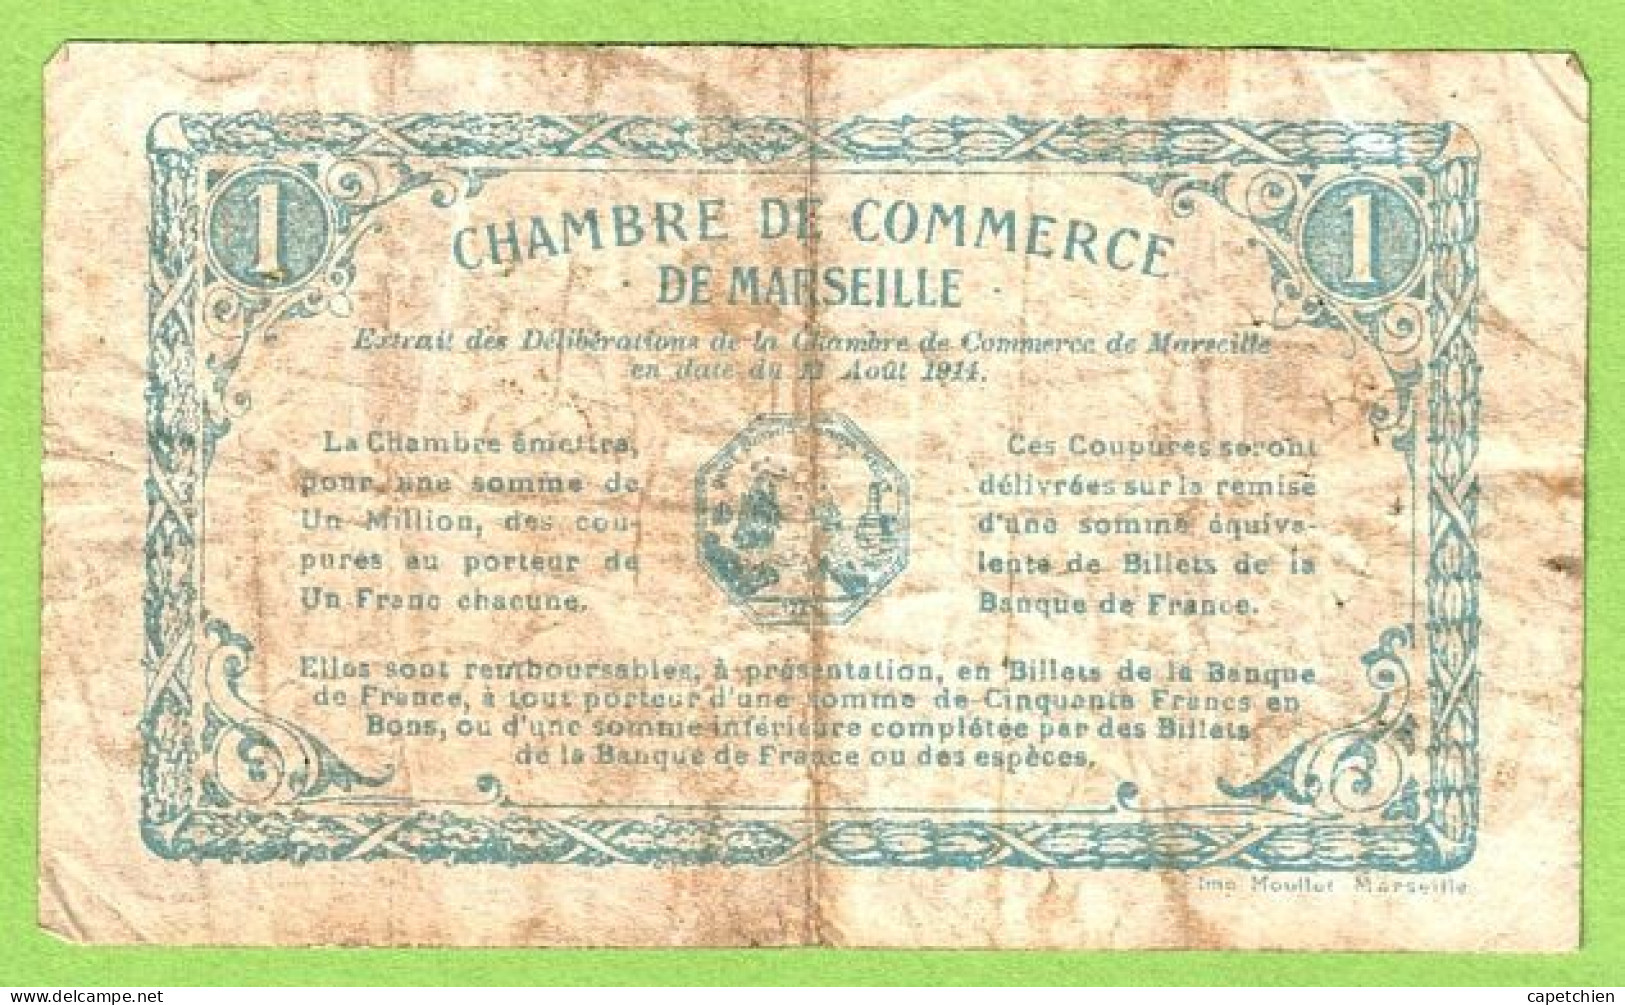 FRANCE / CHAMBRE De COMMERCE / MARSEILLE / 1 FRANC / 13 AOUT 1914 / N° 97921 / SERIE E - Chamber Of Commerce